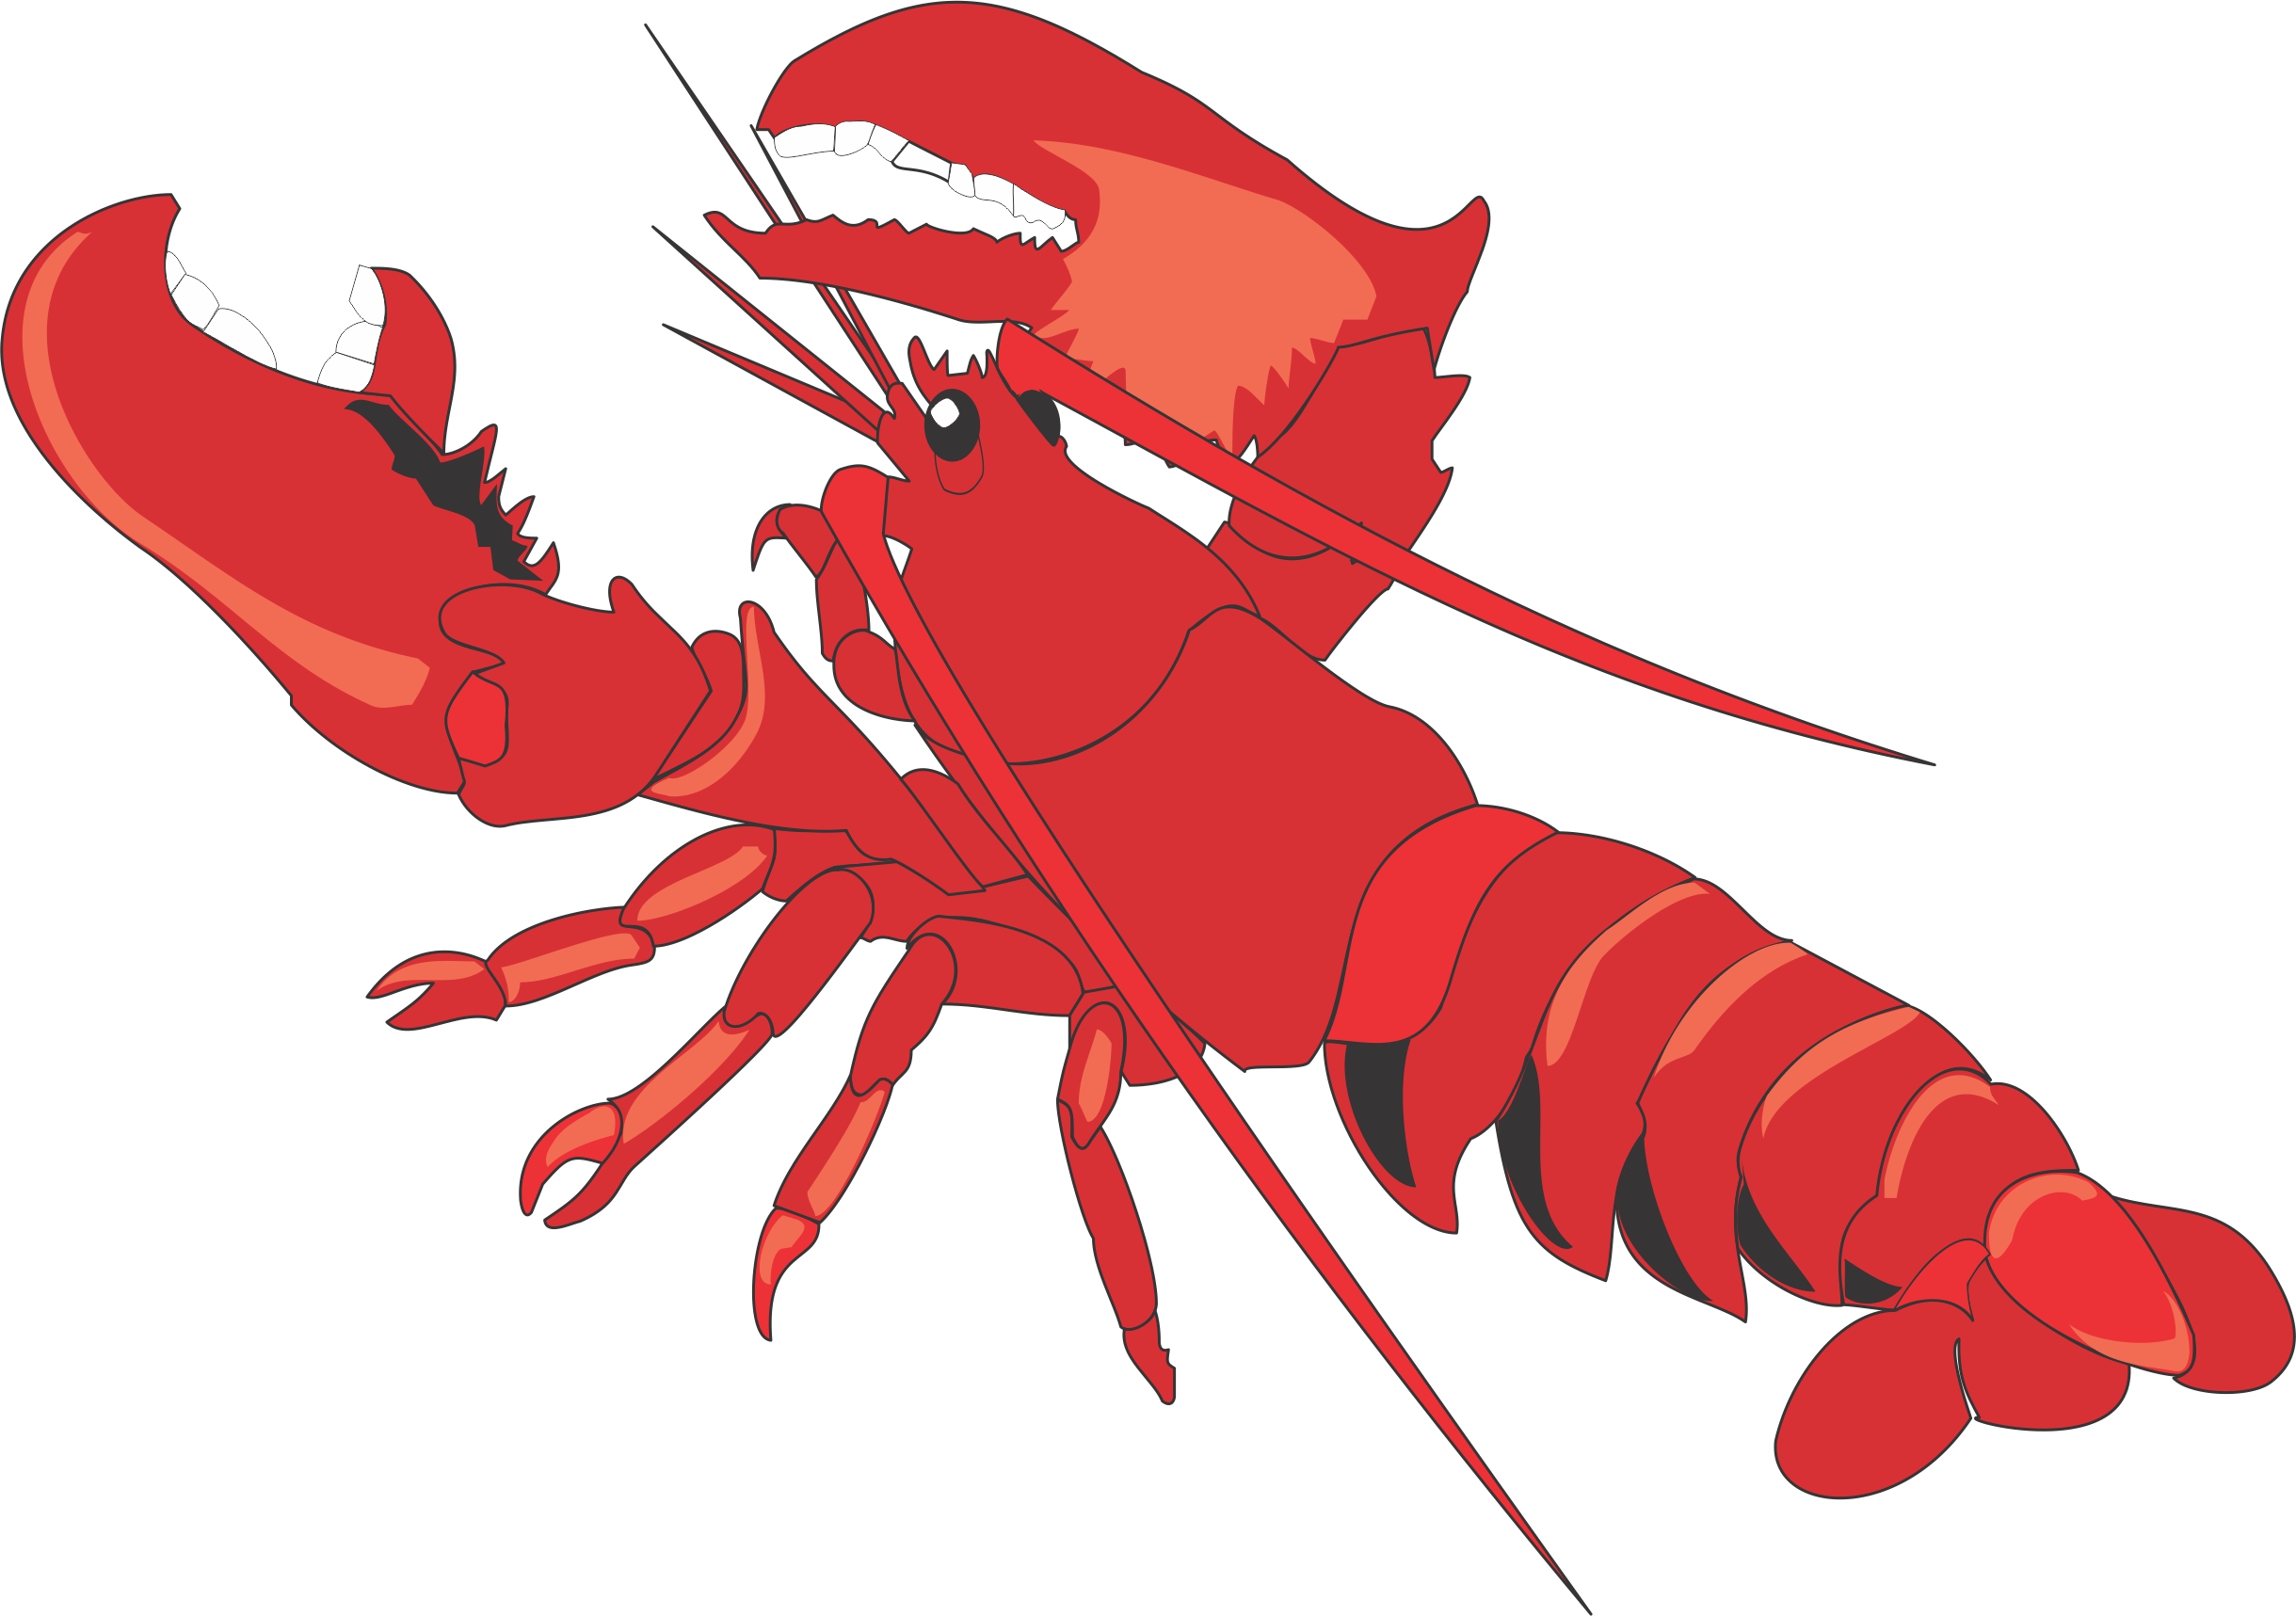 Lobster Clip Art Or Cartoons - Free Clipart Images